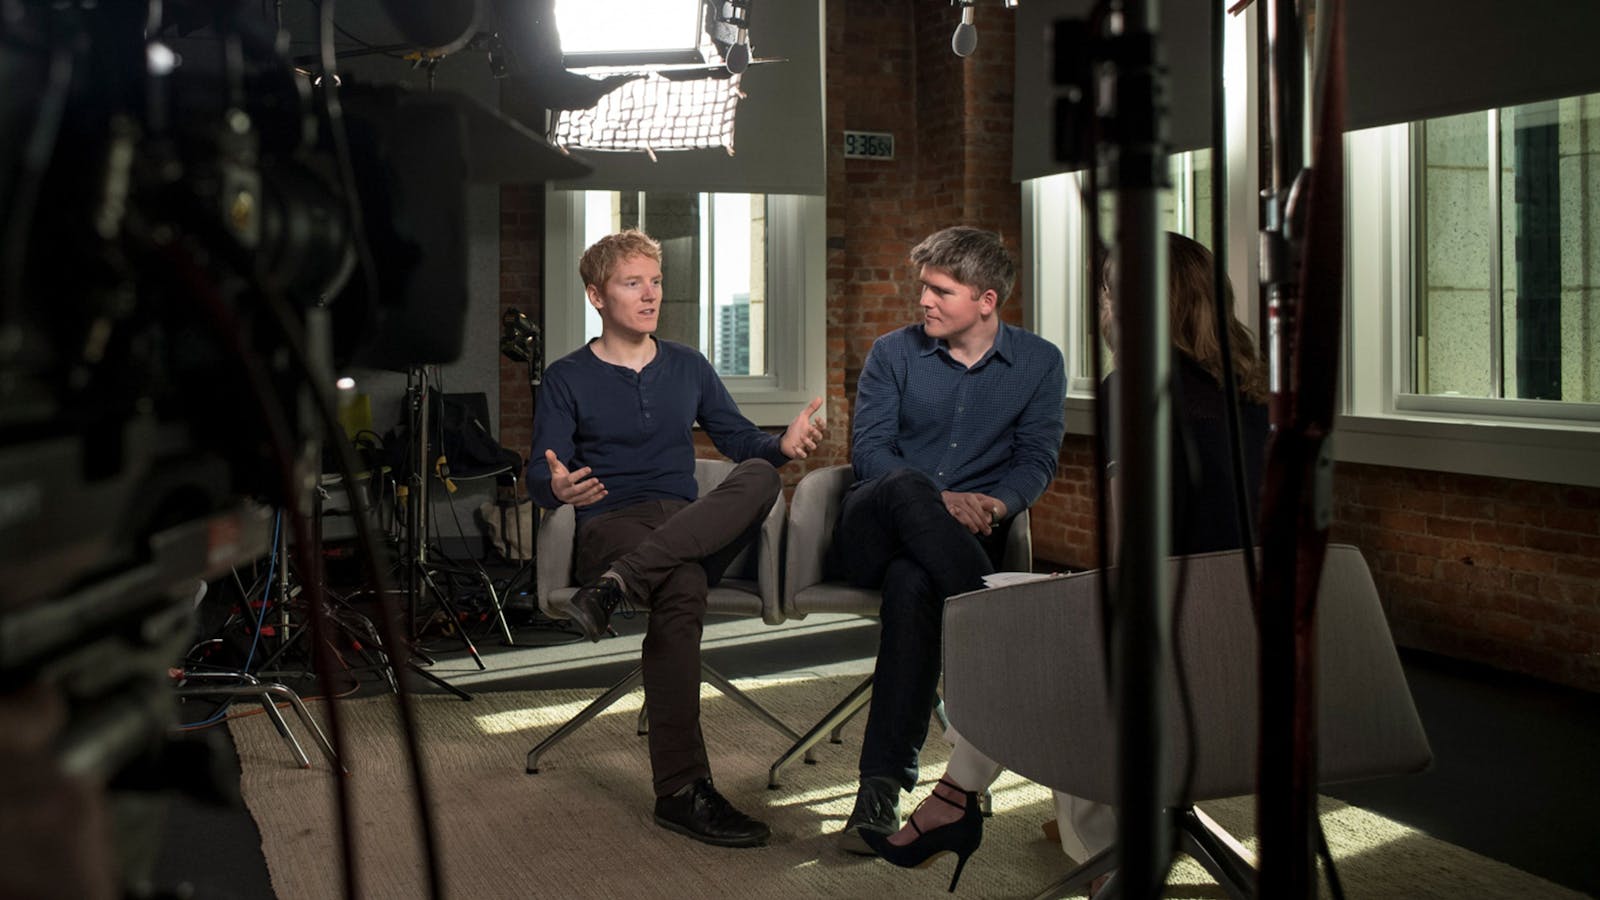 Patrick Collison, CEO and co-founder of Stripe, left, and John Collison, president and co-founder of Stripe. Photo by Bloomberg.